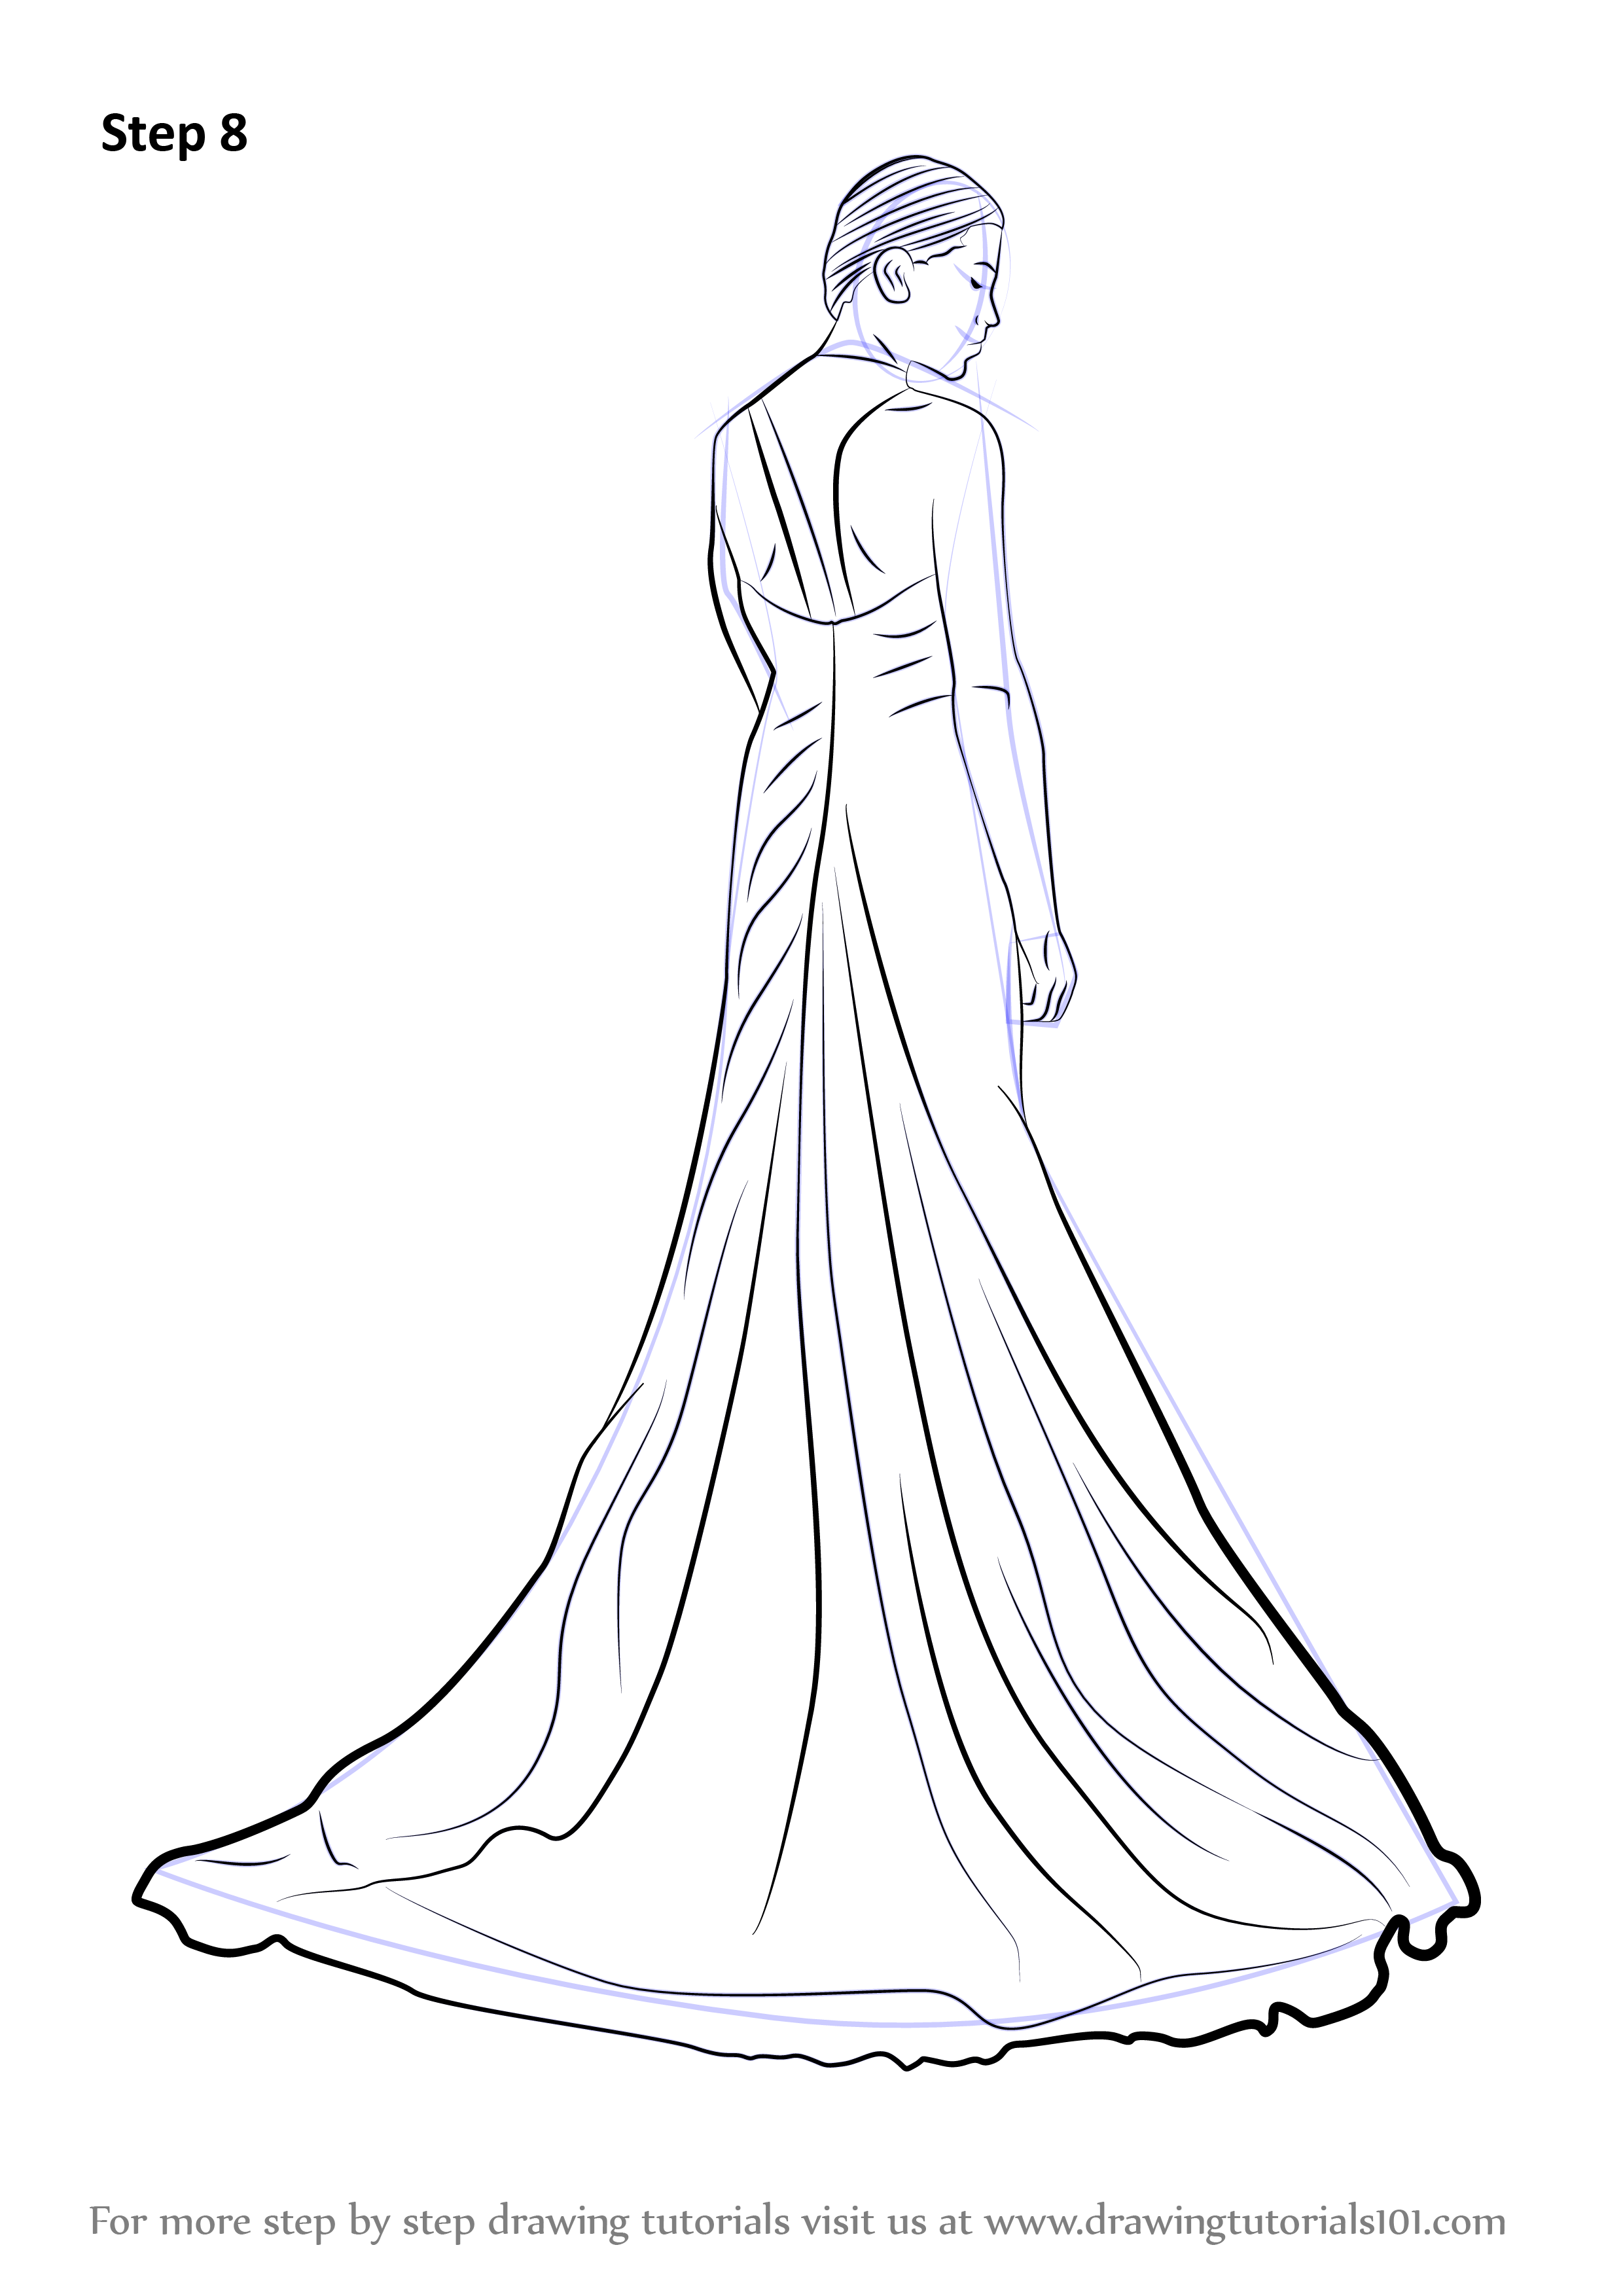 Learn How to Draw a Bridal Gown (Fashion) Step by Step Drawing Tutorials